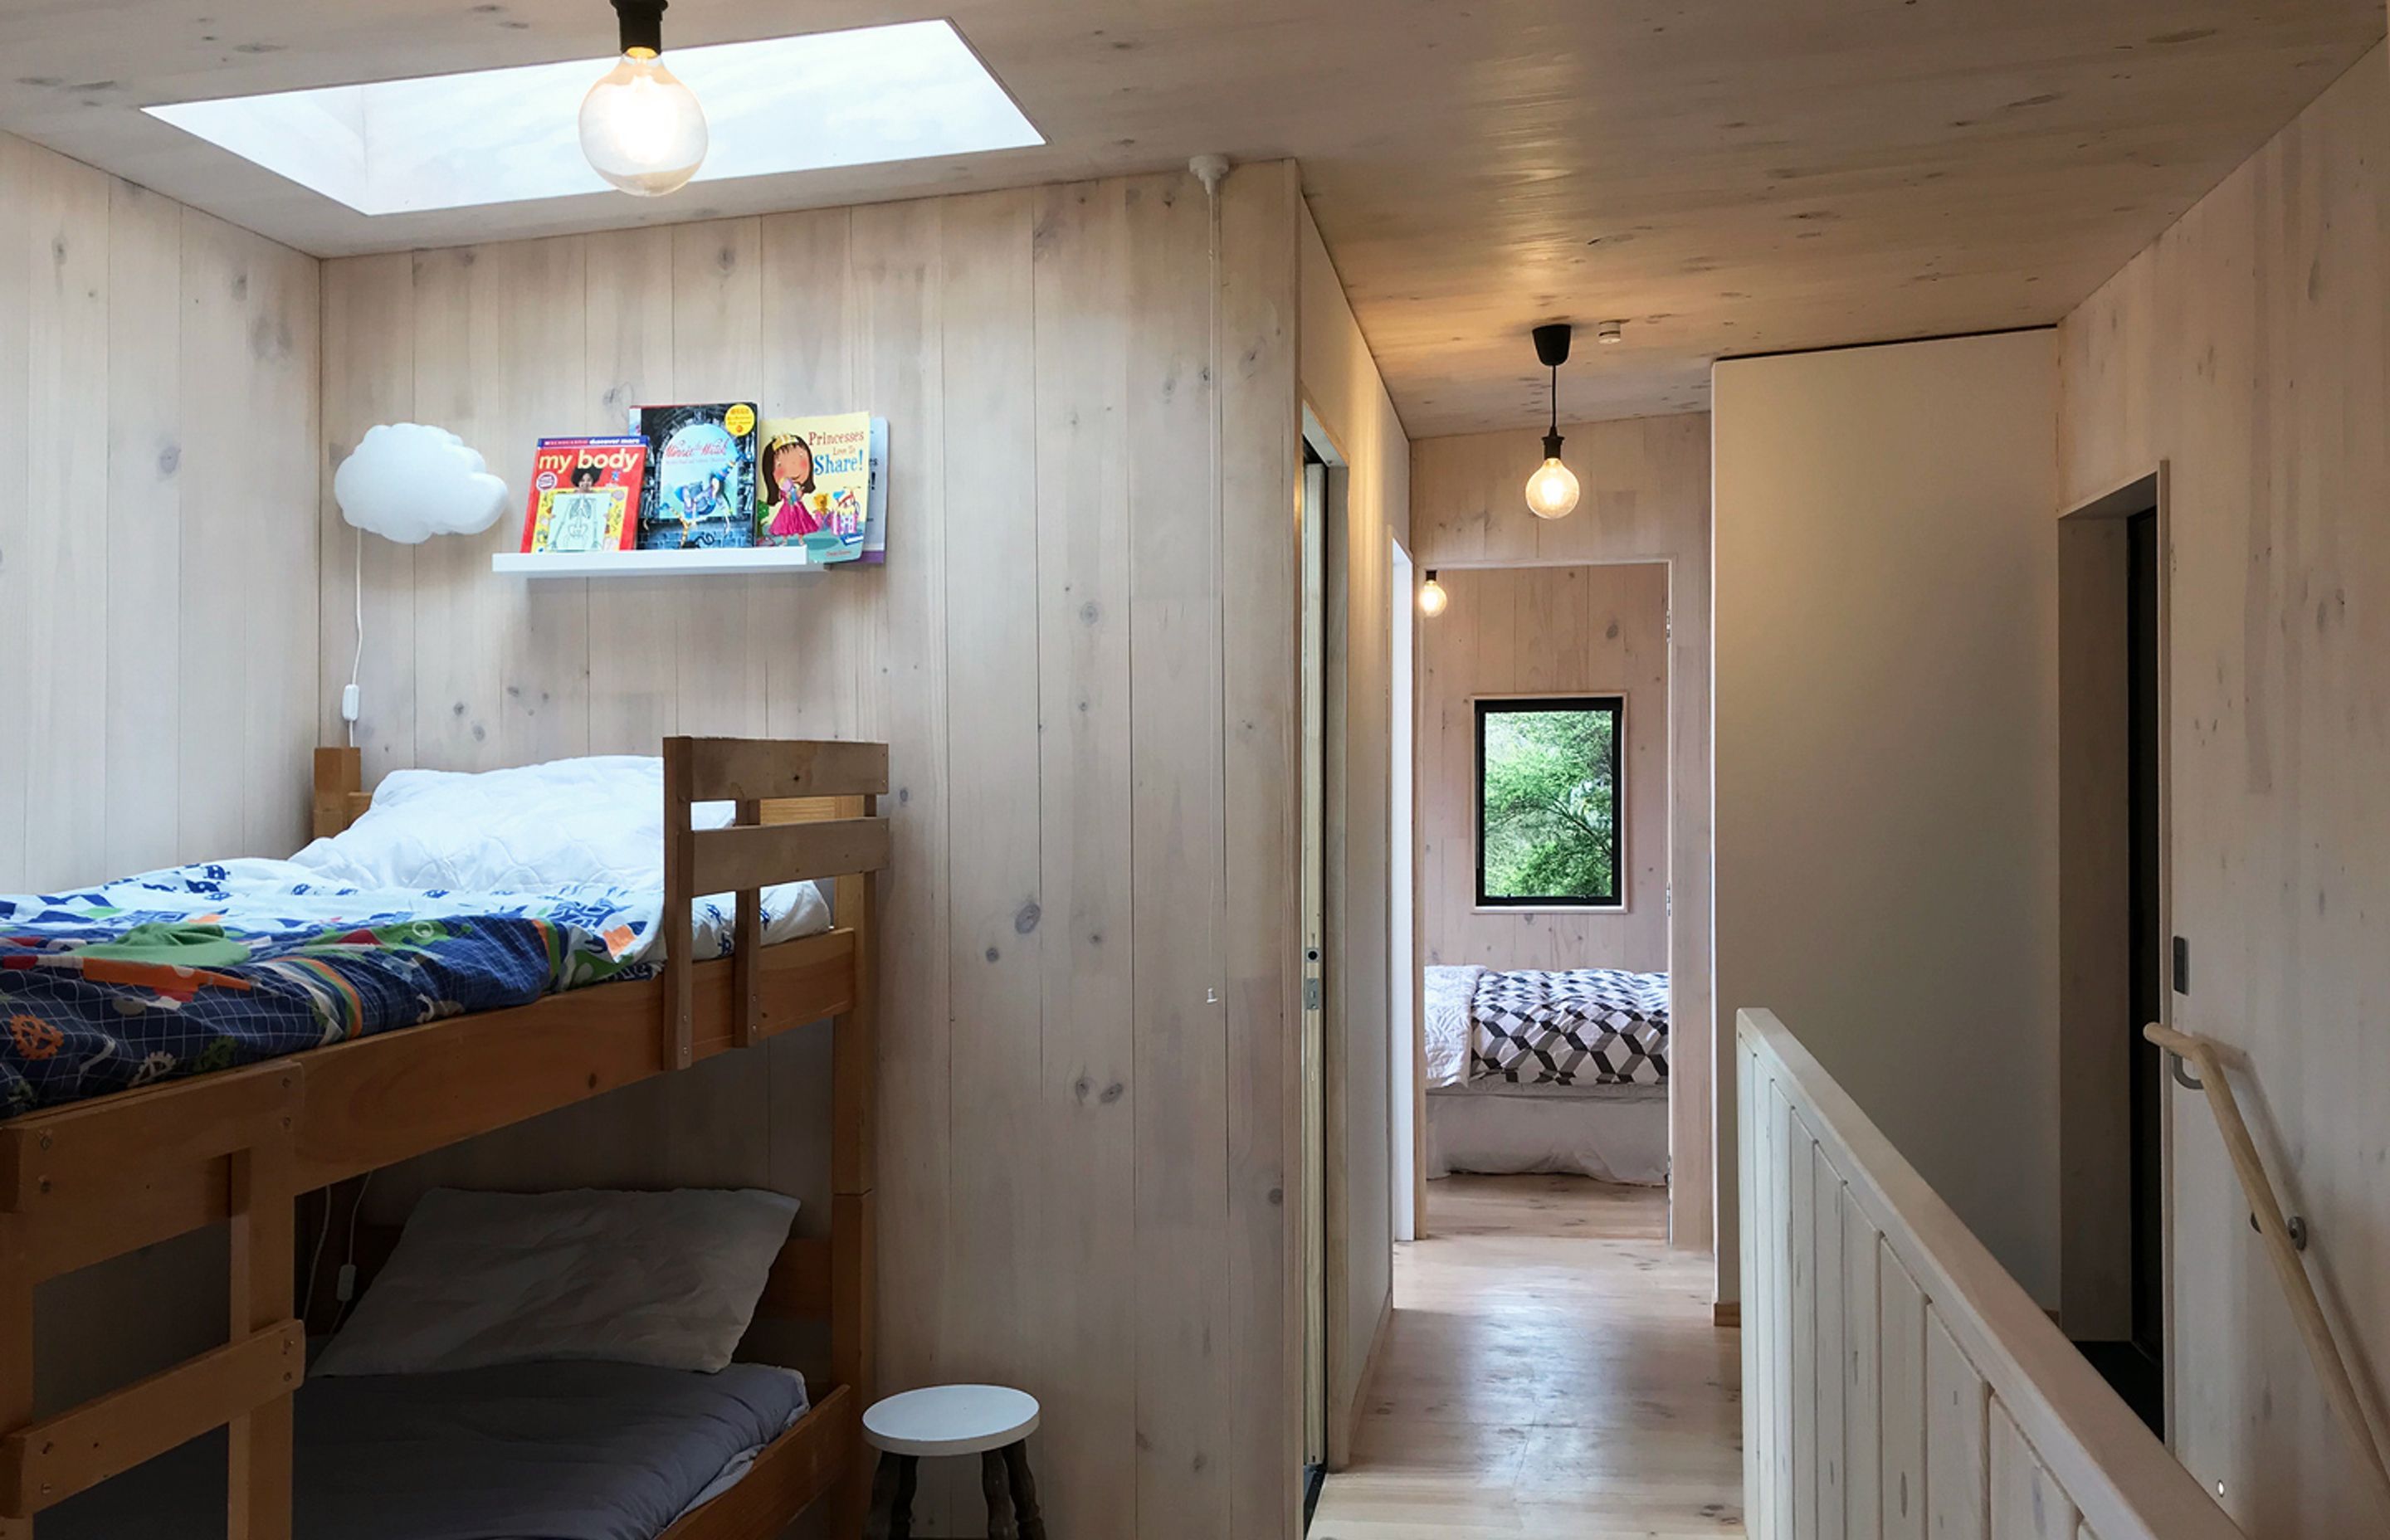 A skylight over the bunk beds offers a view to the stars at night and draws light into the space during the daytime.